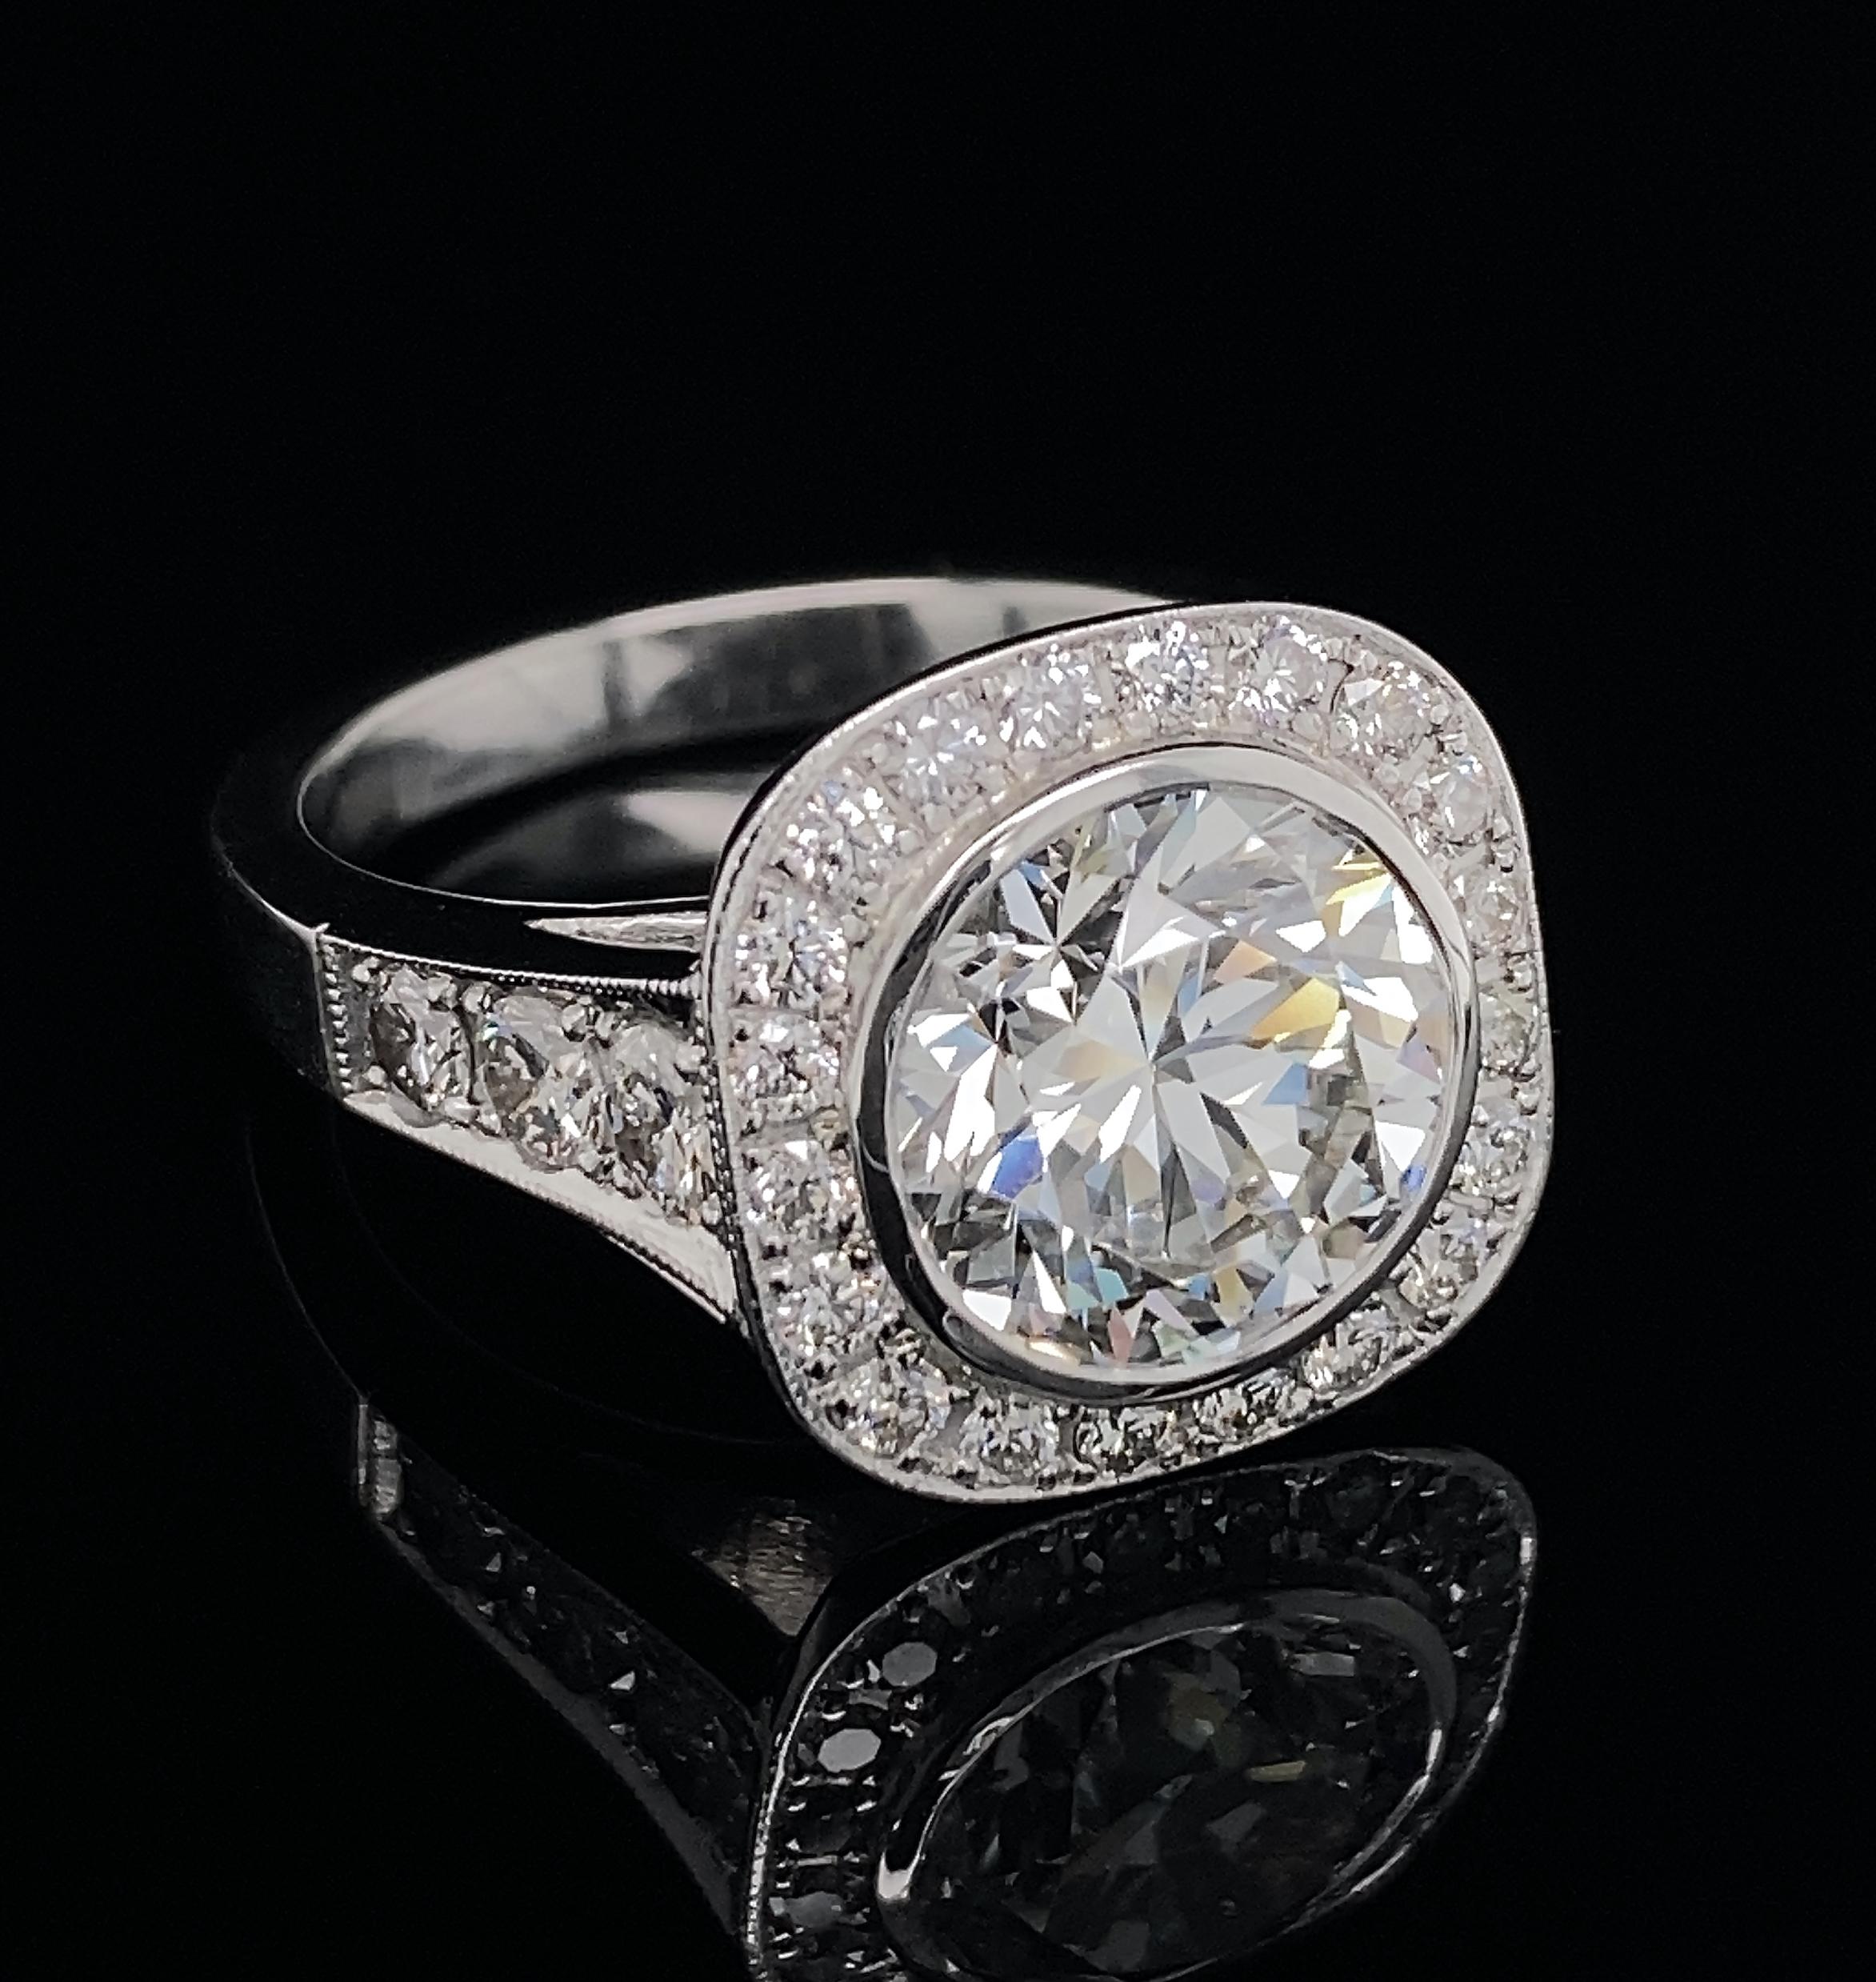 This amazing and important round, brilliant cut diamond is set in an impressive cushion-shaped halo ring with cathedral shoulders and a squared shank.

The GIA certficate, from 2014, shows: a weight of 3.12 carats; E color; VVS2 clarity; 